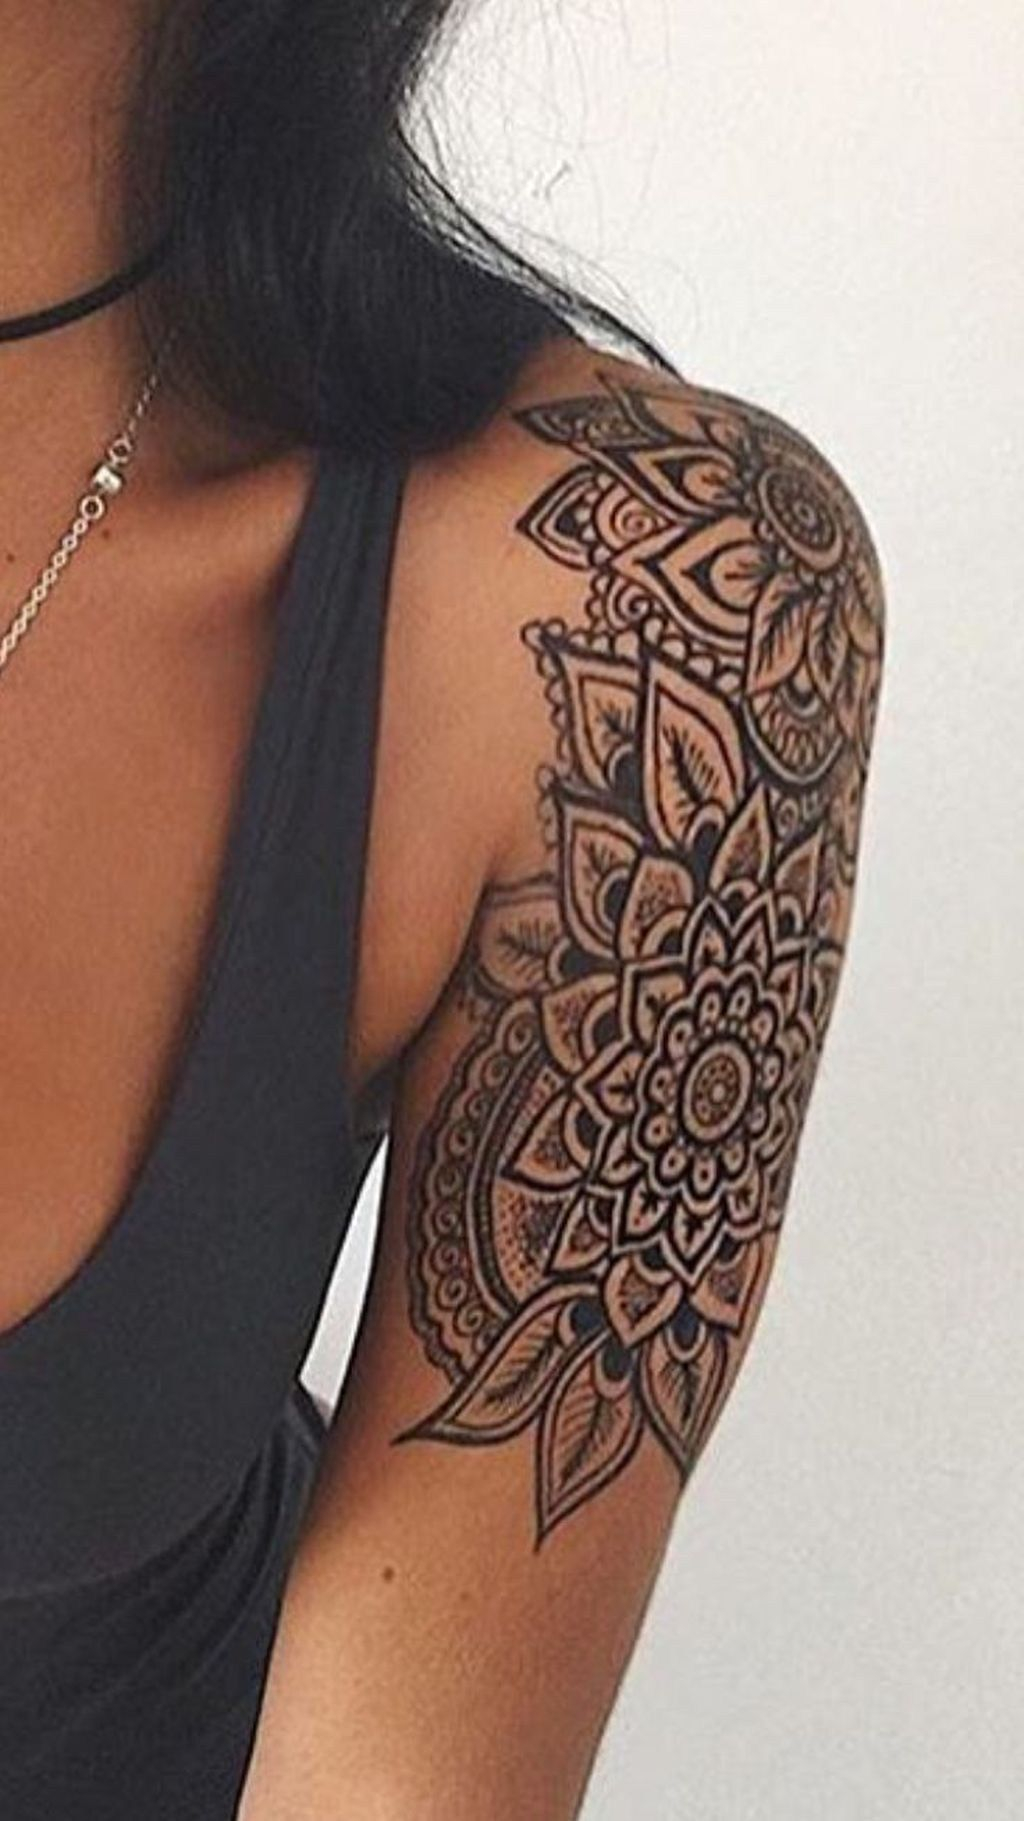 Cute Henna Lace Arm Tattoo Ideas You Should Try 17 Tattooideasarm in dimensions 1024 X 1821